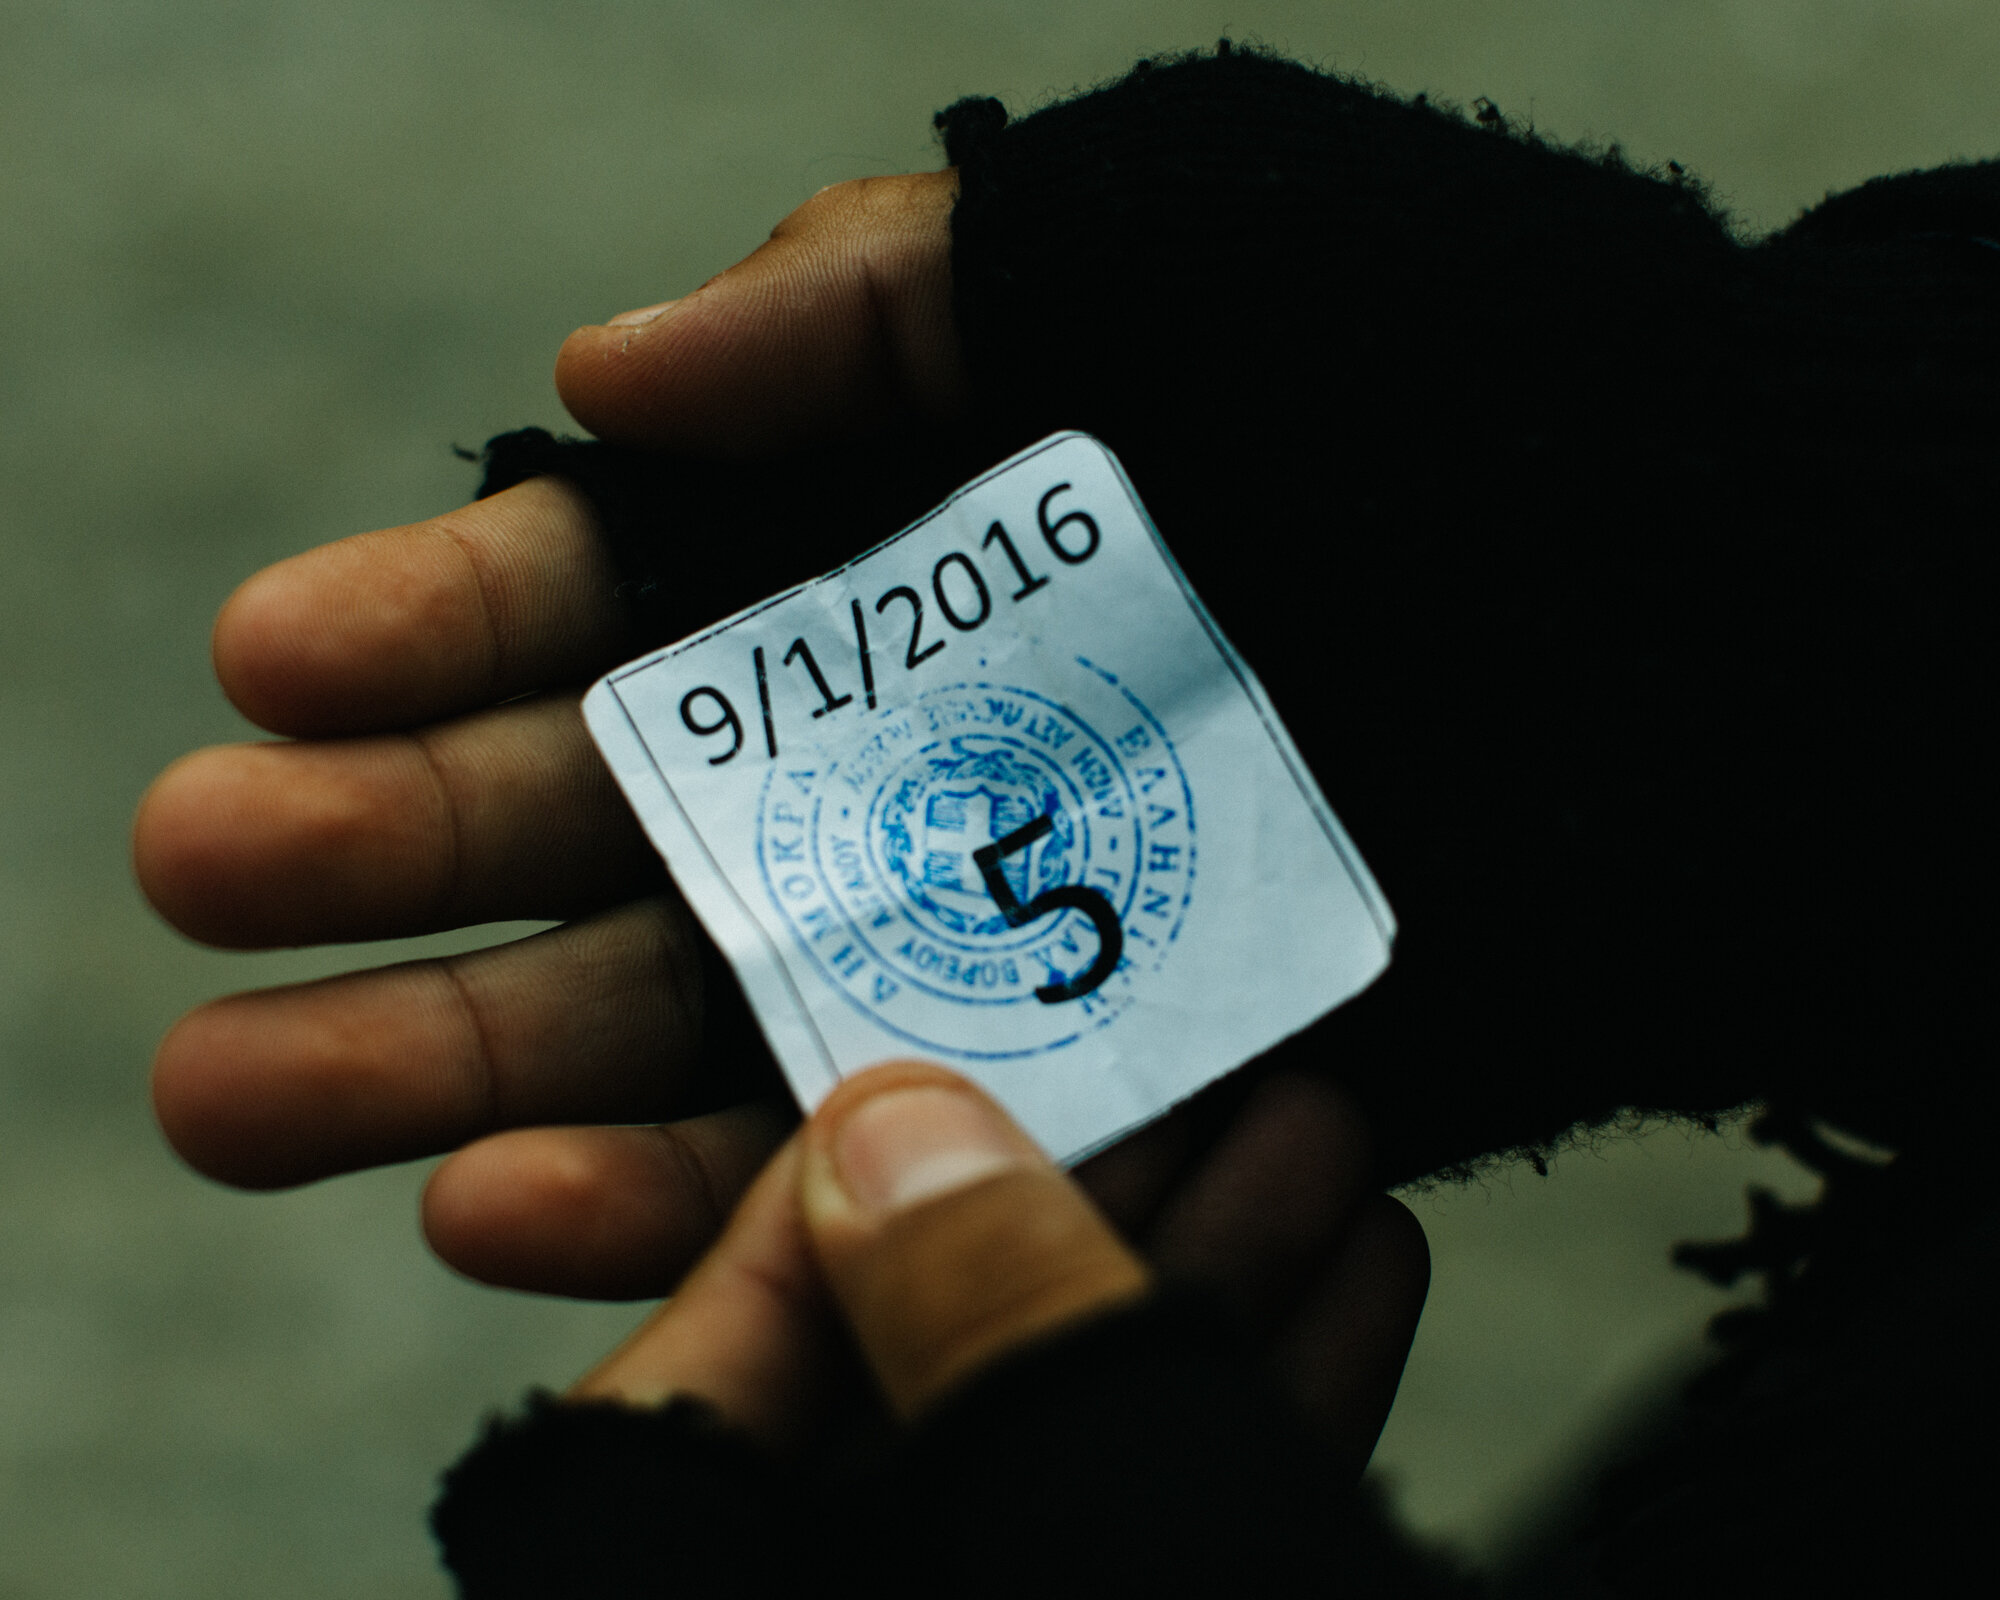  Ammar holds his numbered ticket that he received upon entrance into Moria, Mytilene’s refugee camp and registration center. Once his number is called, he must wait in line, sometimes for a full day, to receive his EU registration papers. 